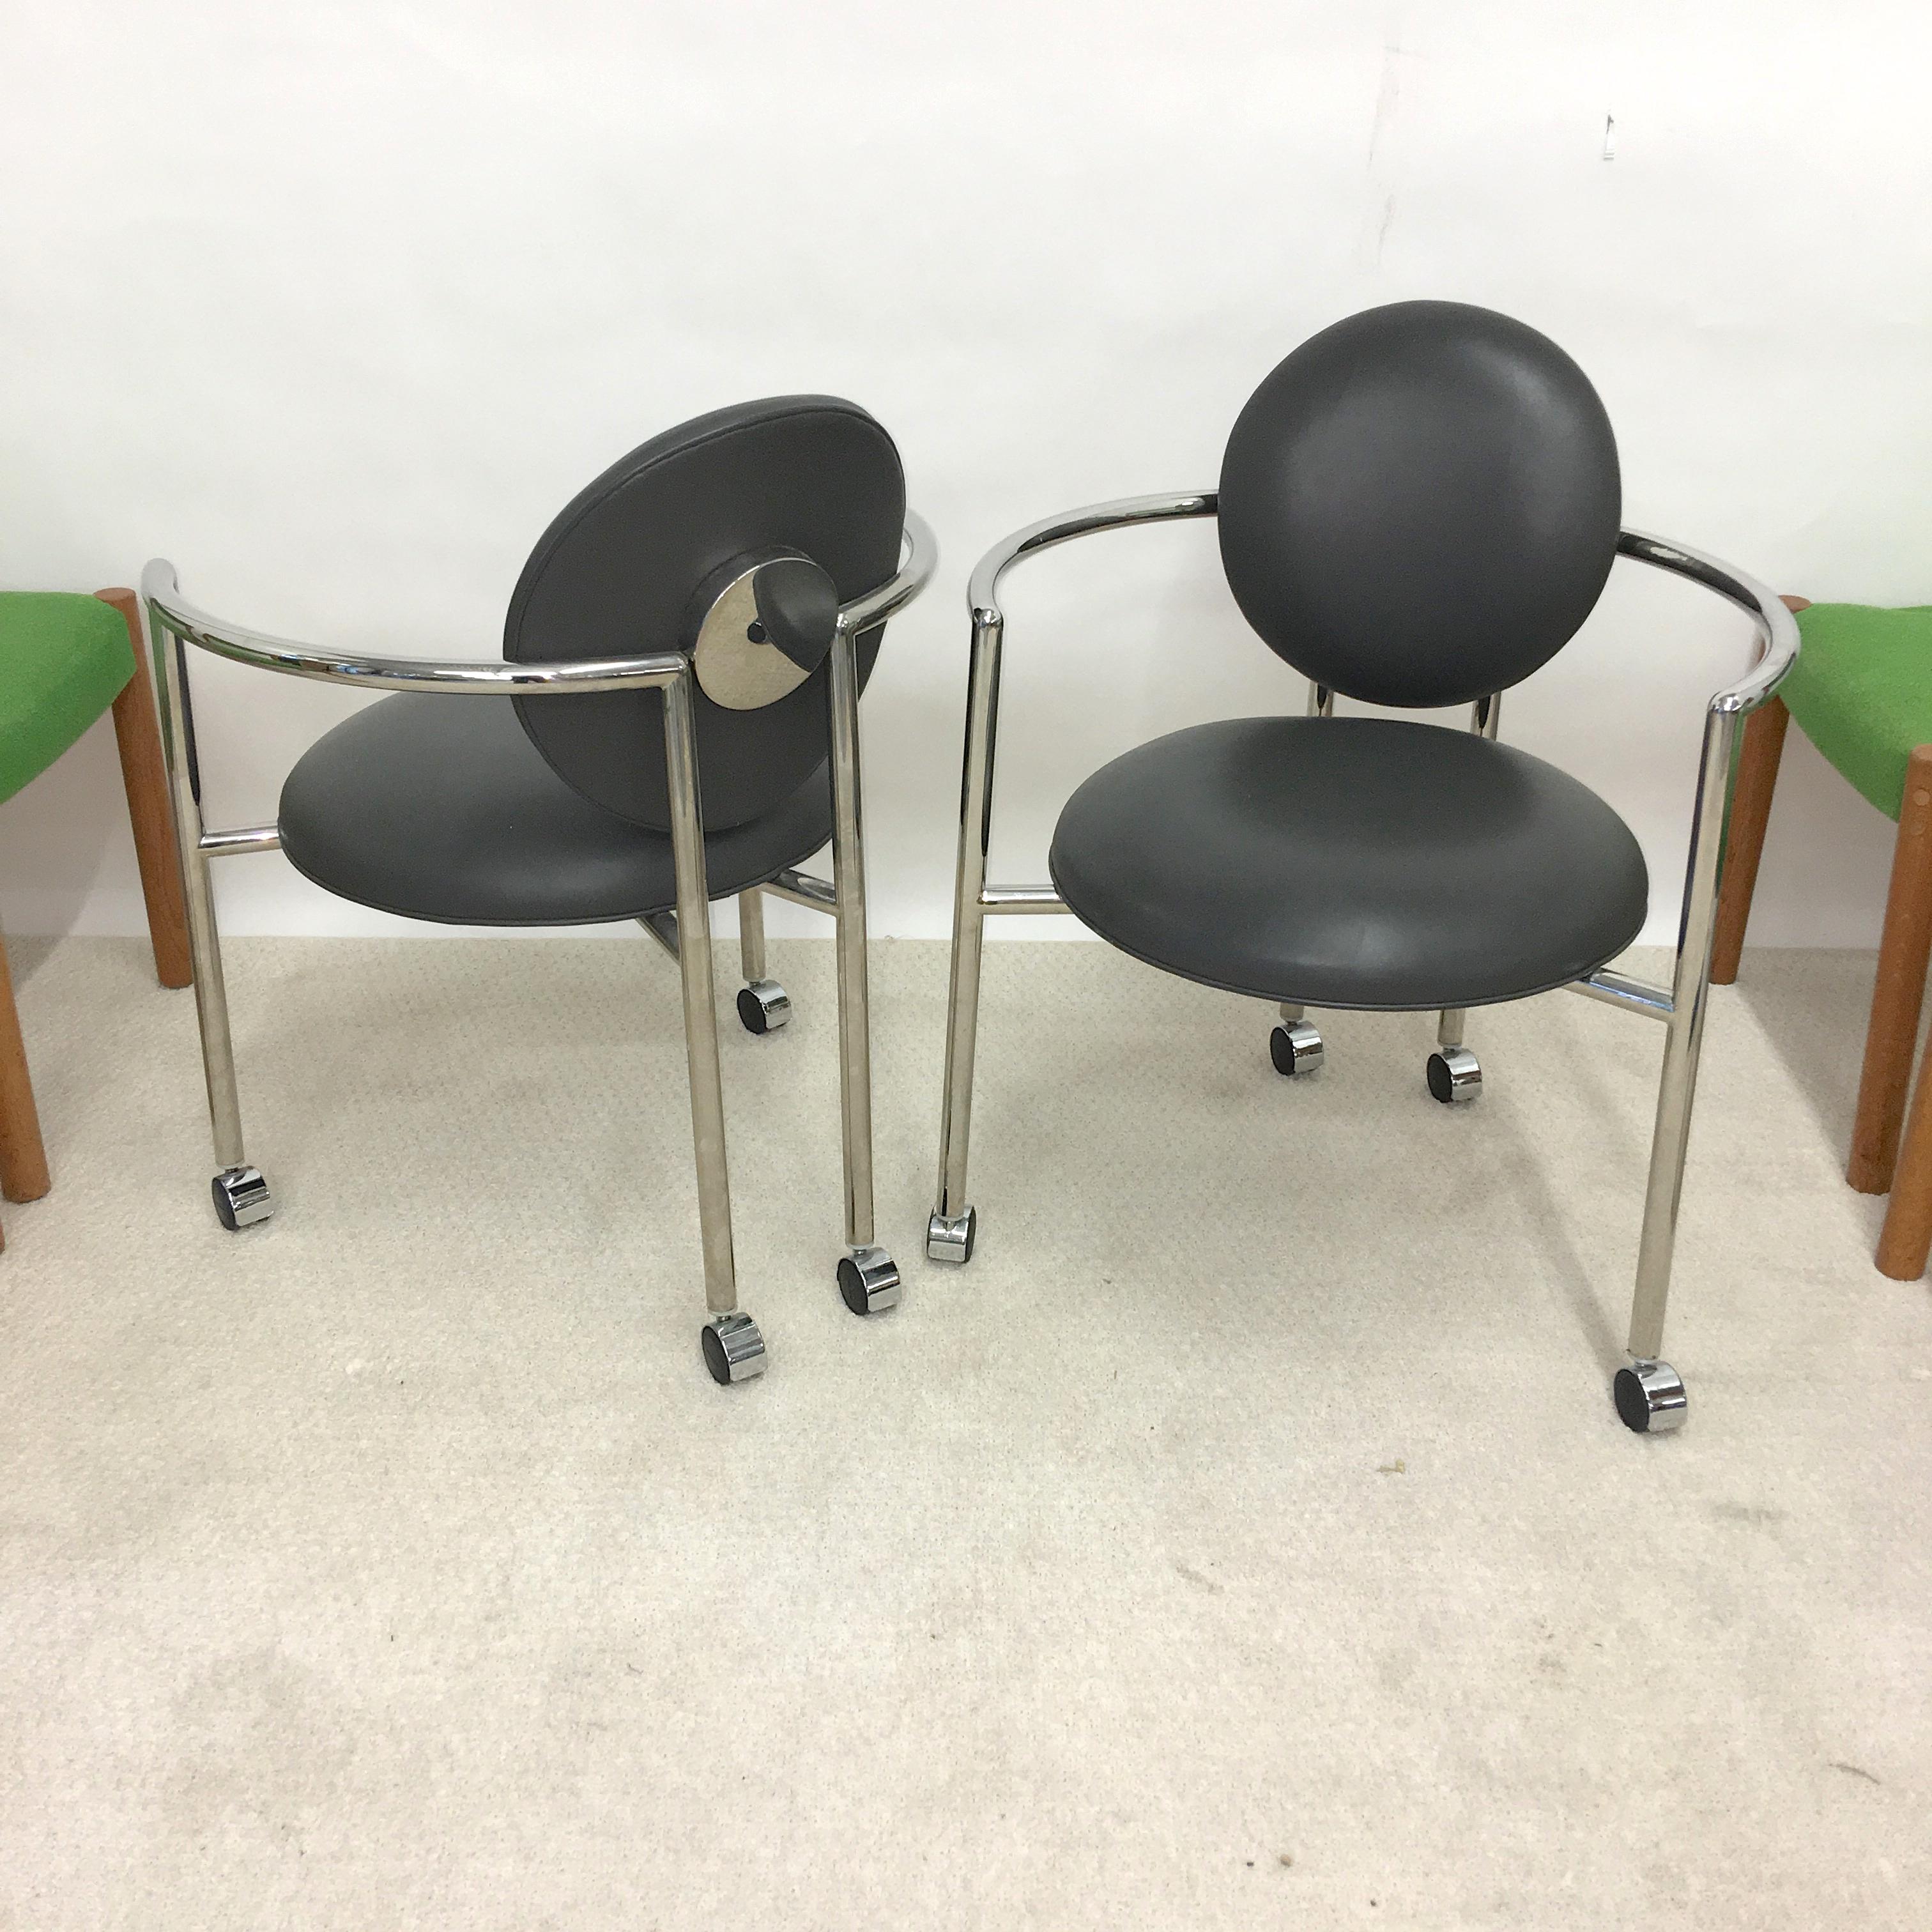 Pair of Moon Chairs by Stanley Jay Friedman for Brueton (Ende des 20. Jahrhunderts)